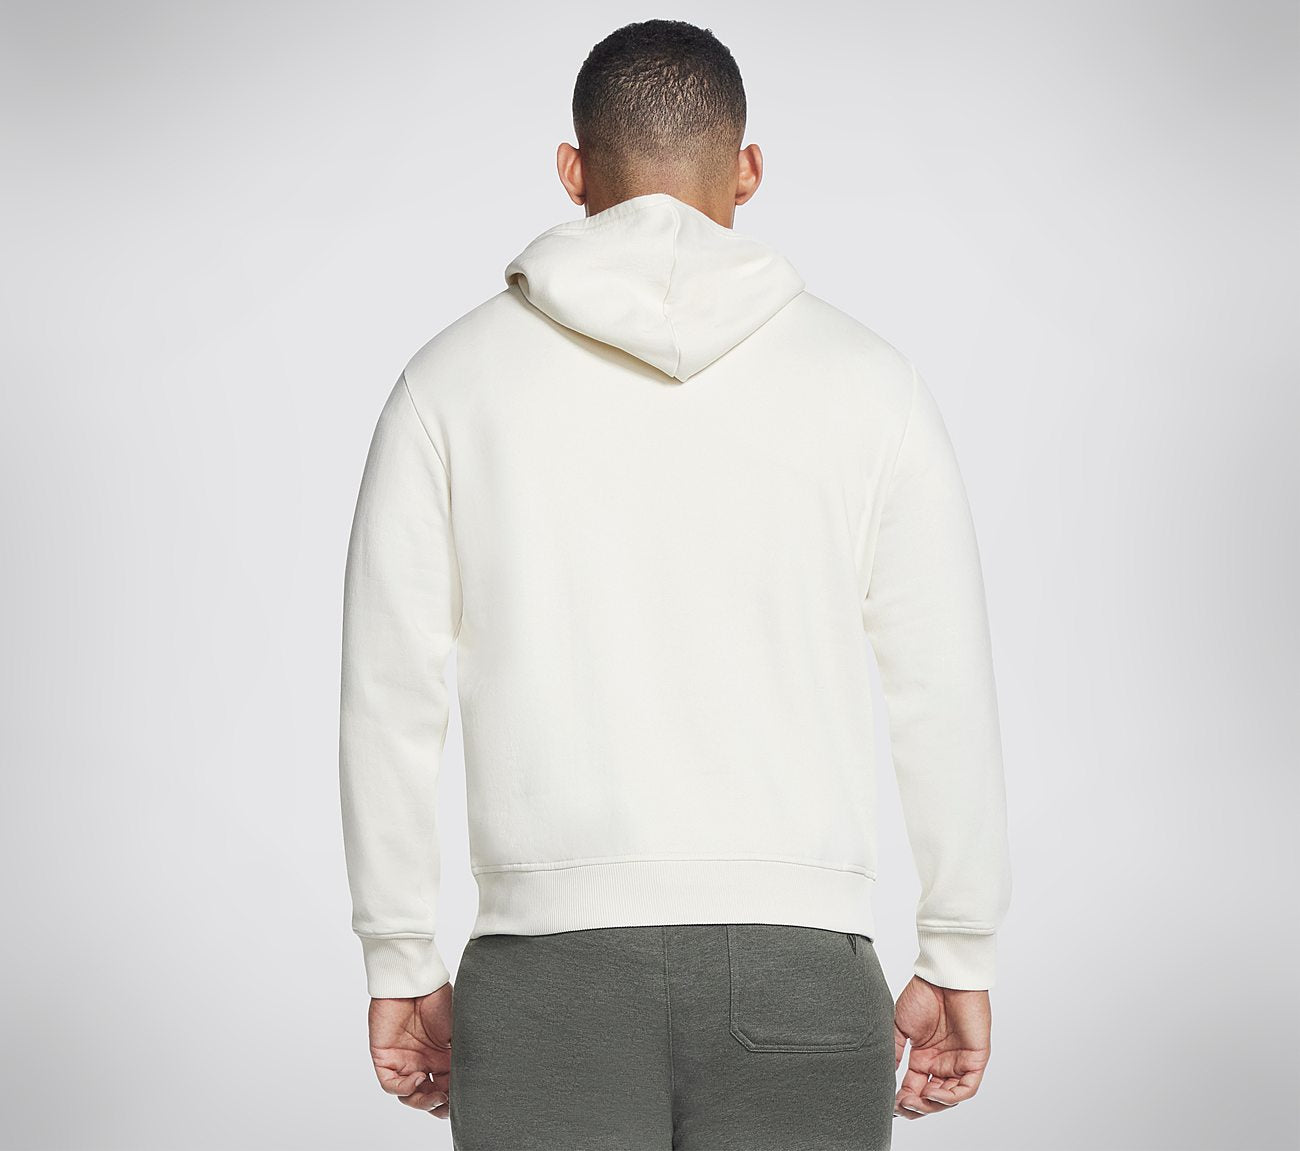 Skech-Sweats Incognito Hoodie